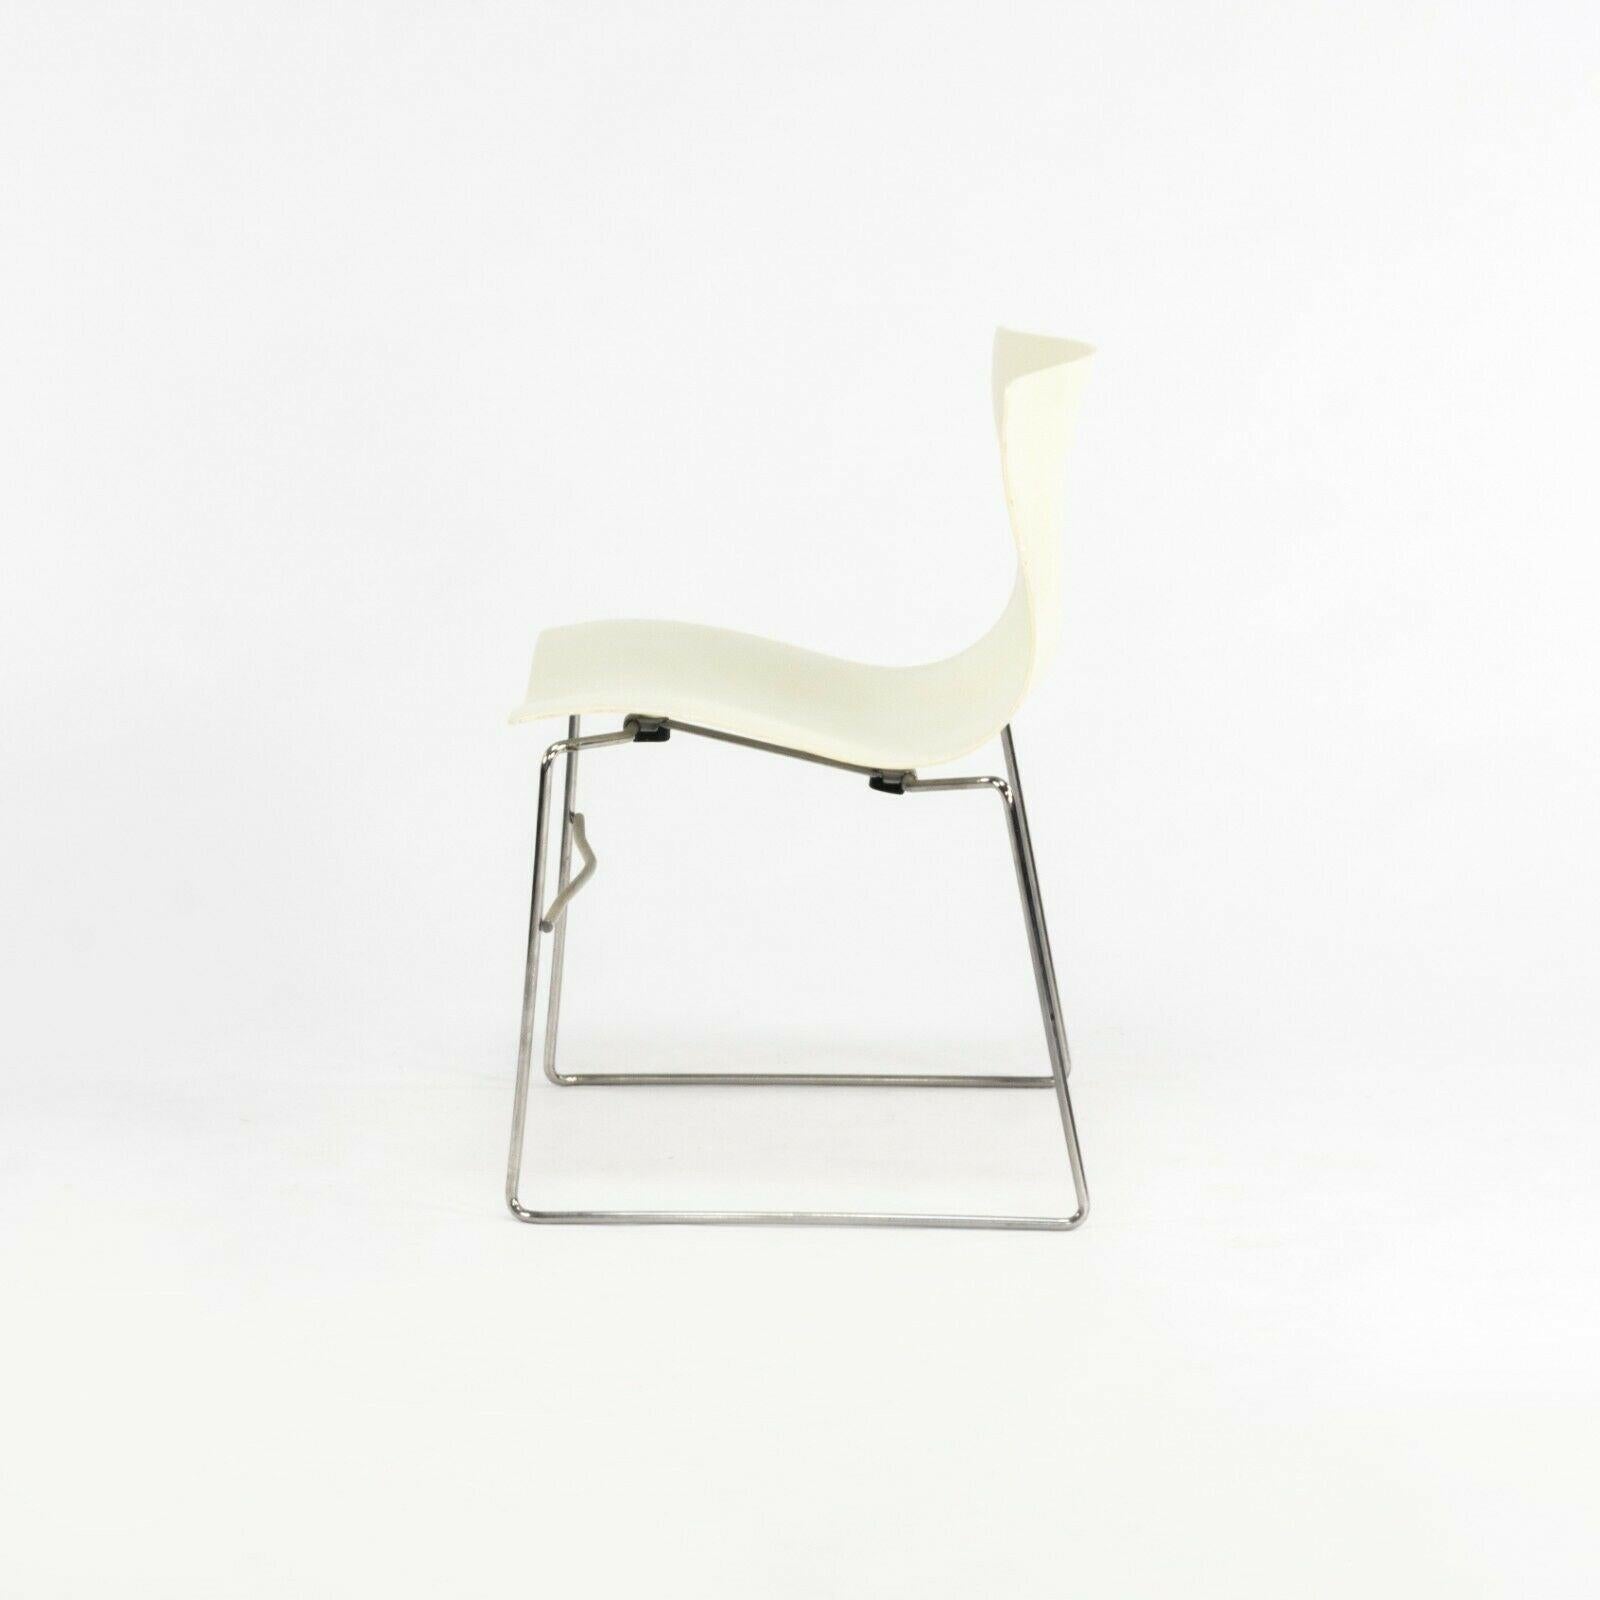 1992 Knoll H&kerchief Stacking Chairs by Massimo & Lella Vignelli 10x Available In Good Condition In Philadelphia, PA